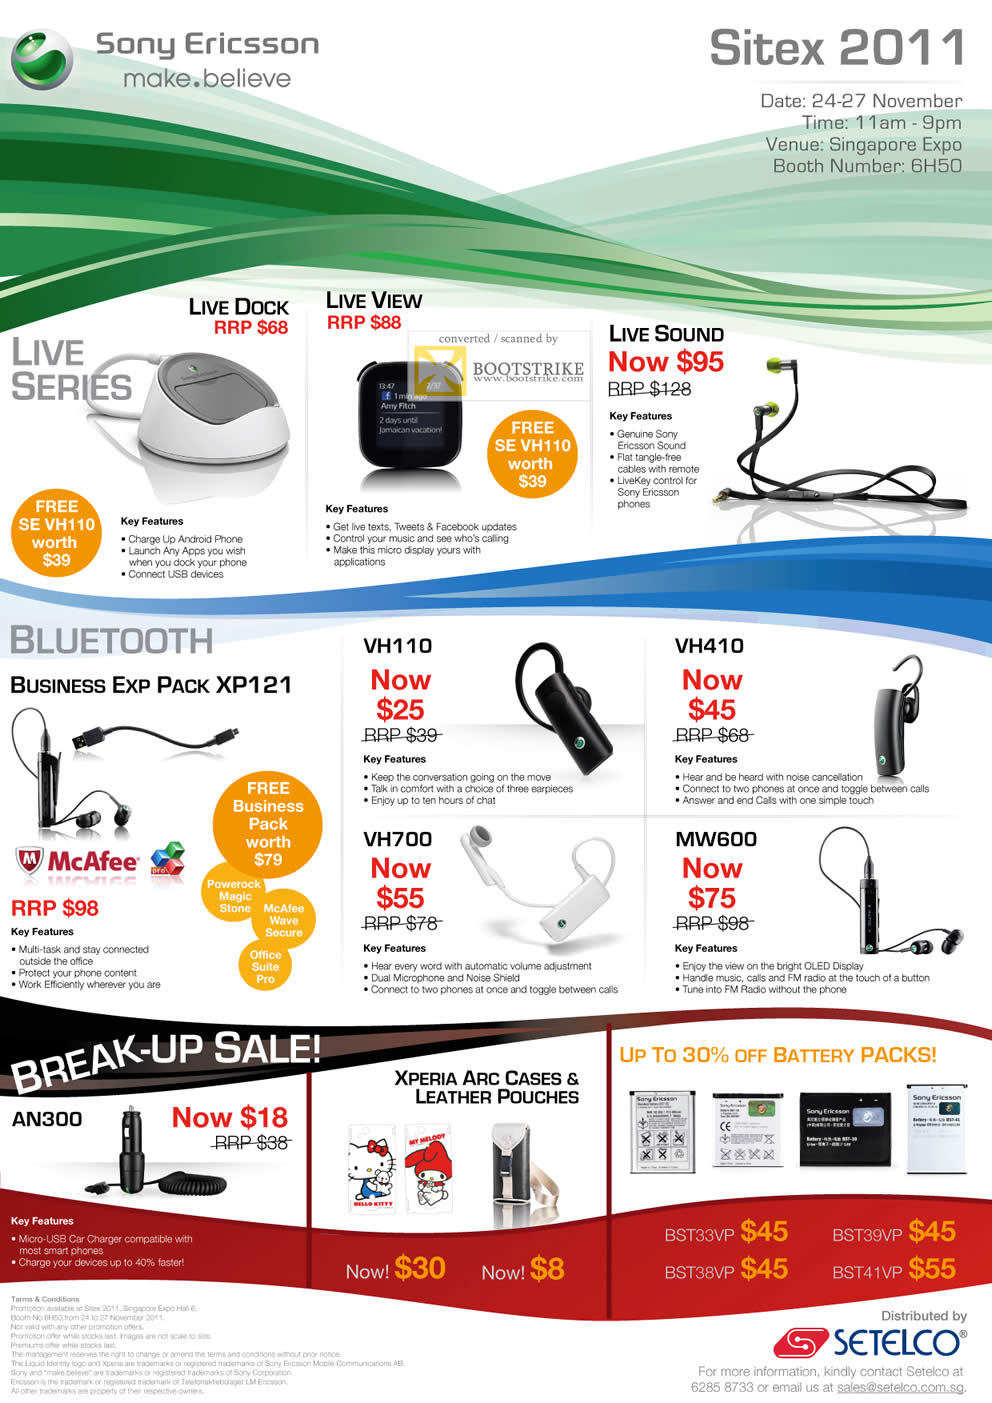 SITEX 2011 price list image brochure of Setelco Sony Ericsson Docking Station, Live Dock, Live View, Live Sound Earphones, Bluetooth Exp Pack XP121, VH110, VH700, VH410, MW600, AN300, Battery Pack, Case, Pouch